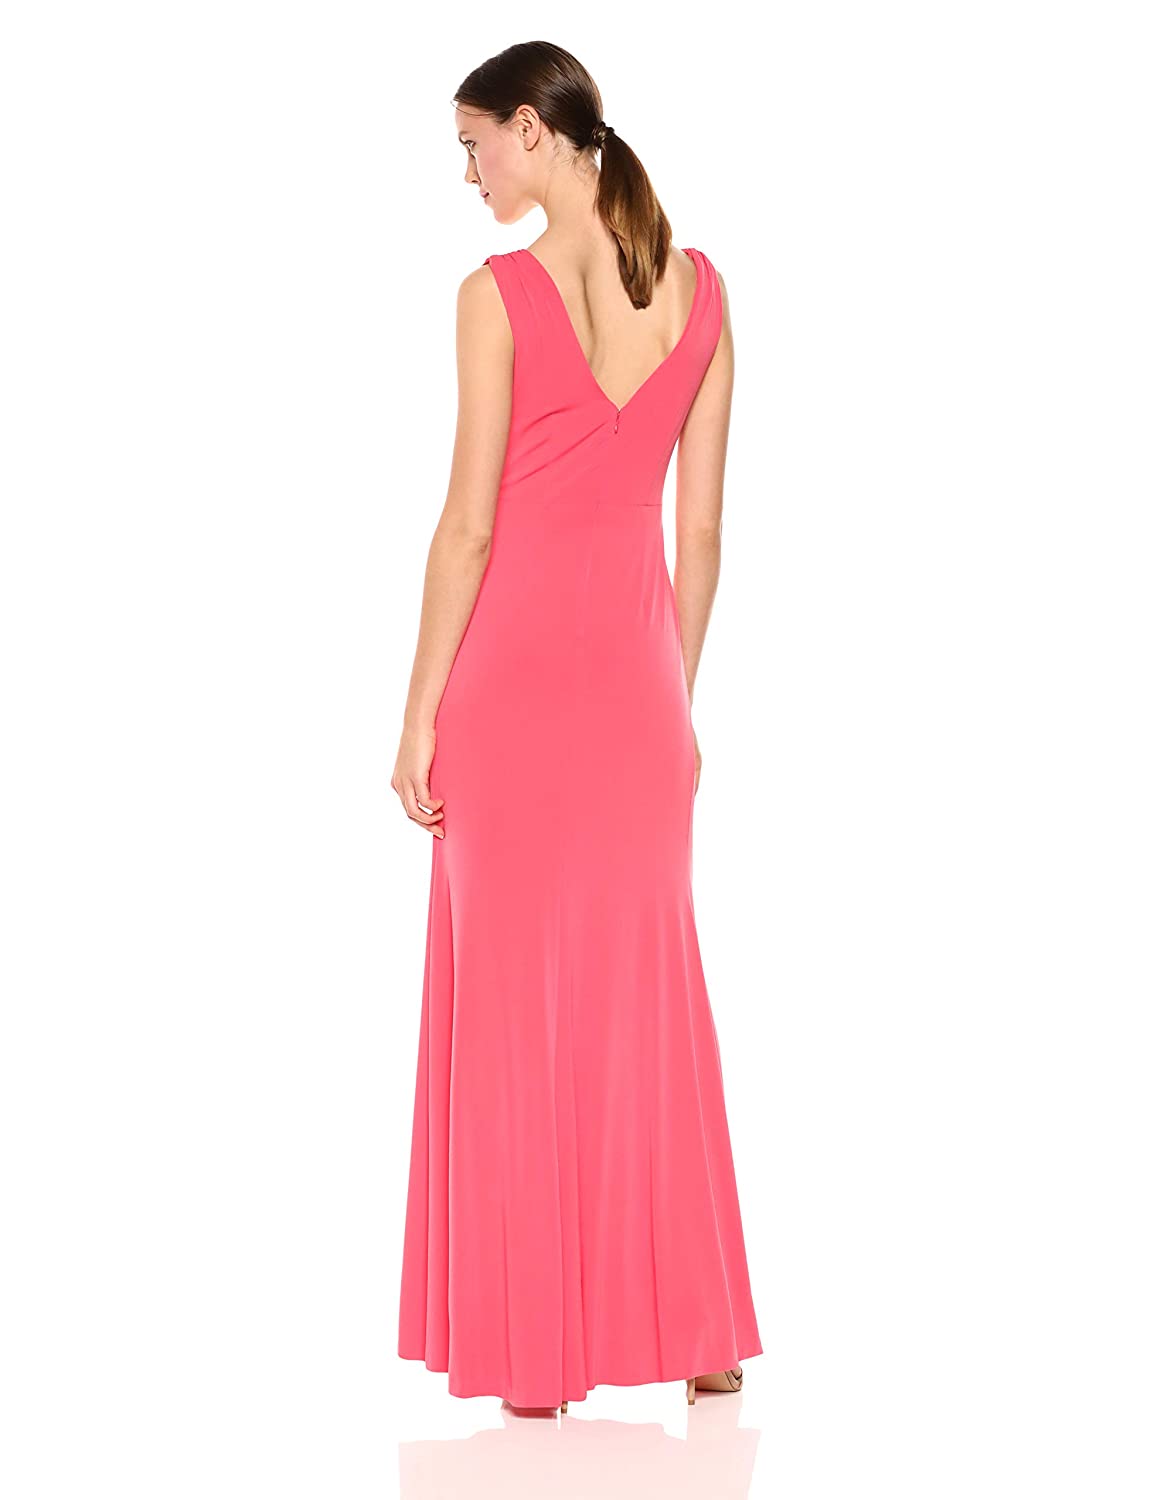 Calvin Klein Womens Sleeveless V Neck With Twist Knot Front Gown